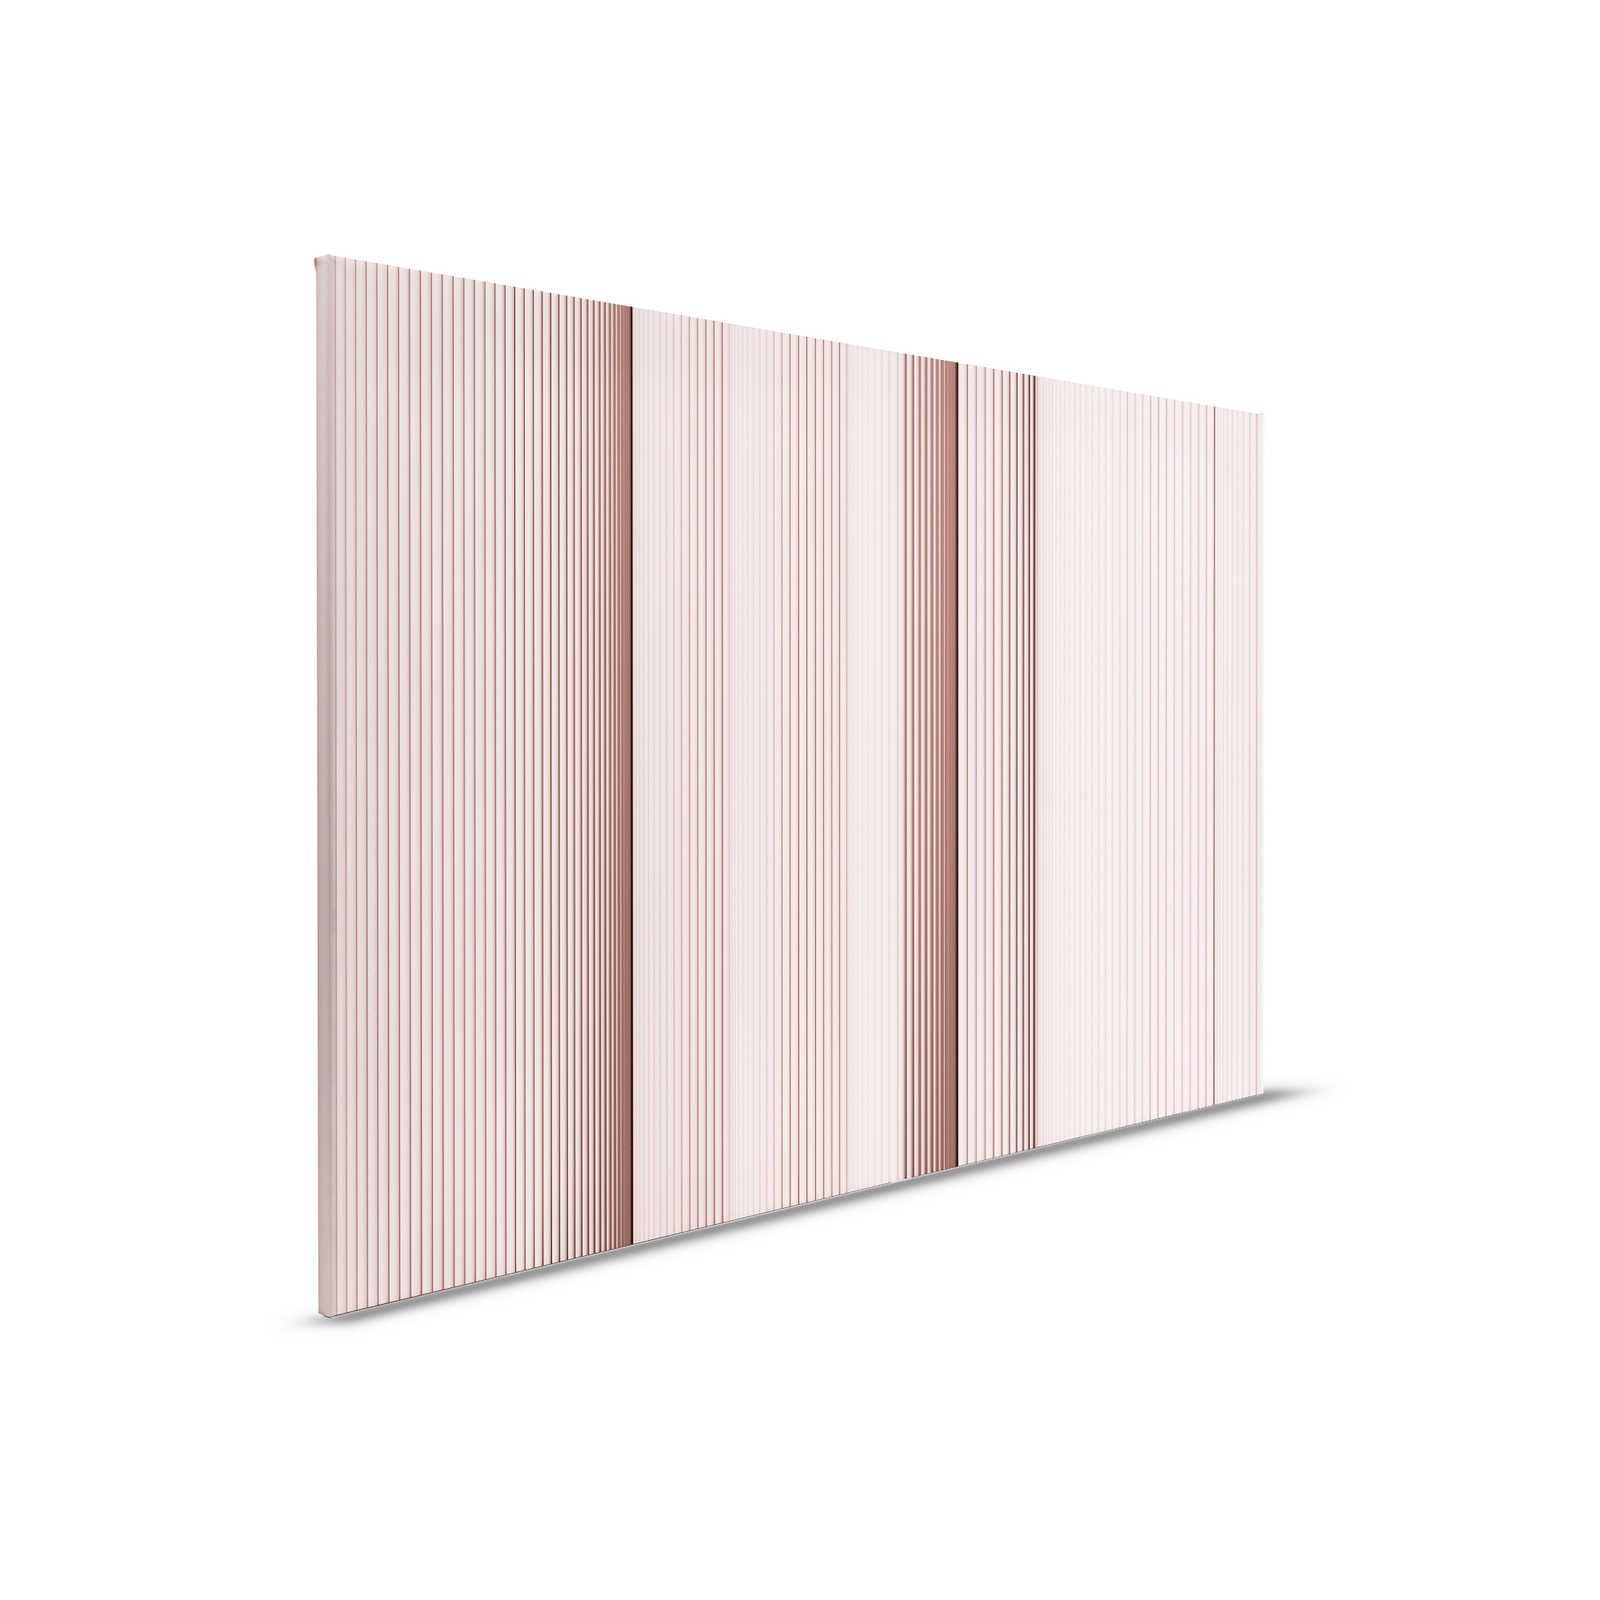         Magic Wall 4 - Stripe Canvas Painting with 3D Illusion Effect, Pink & White - 0.90 m x 0.60 m
    